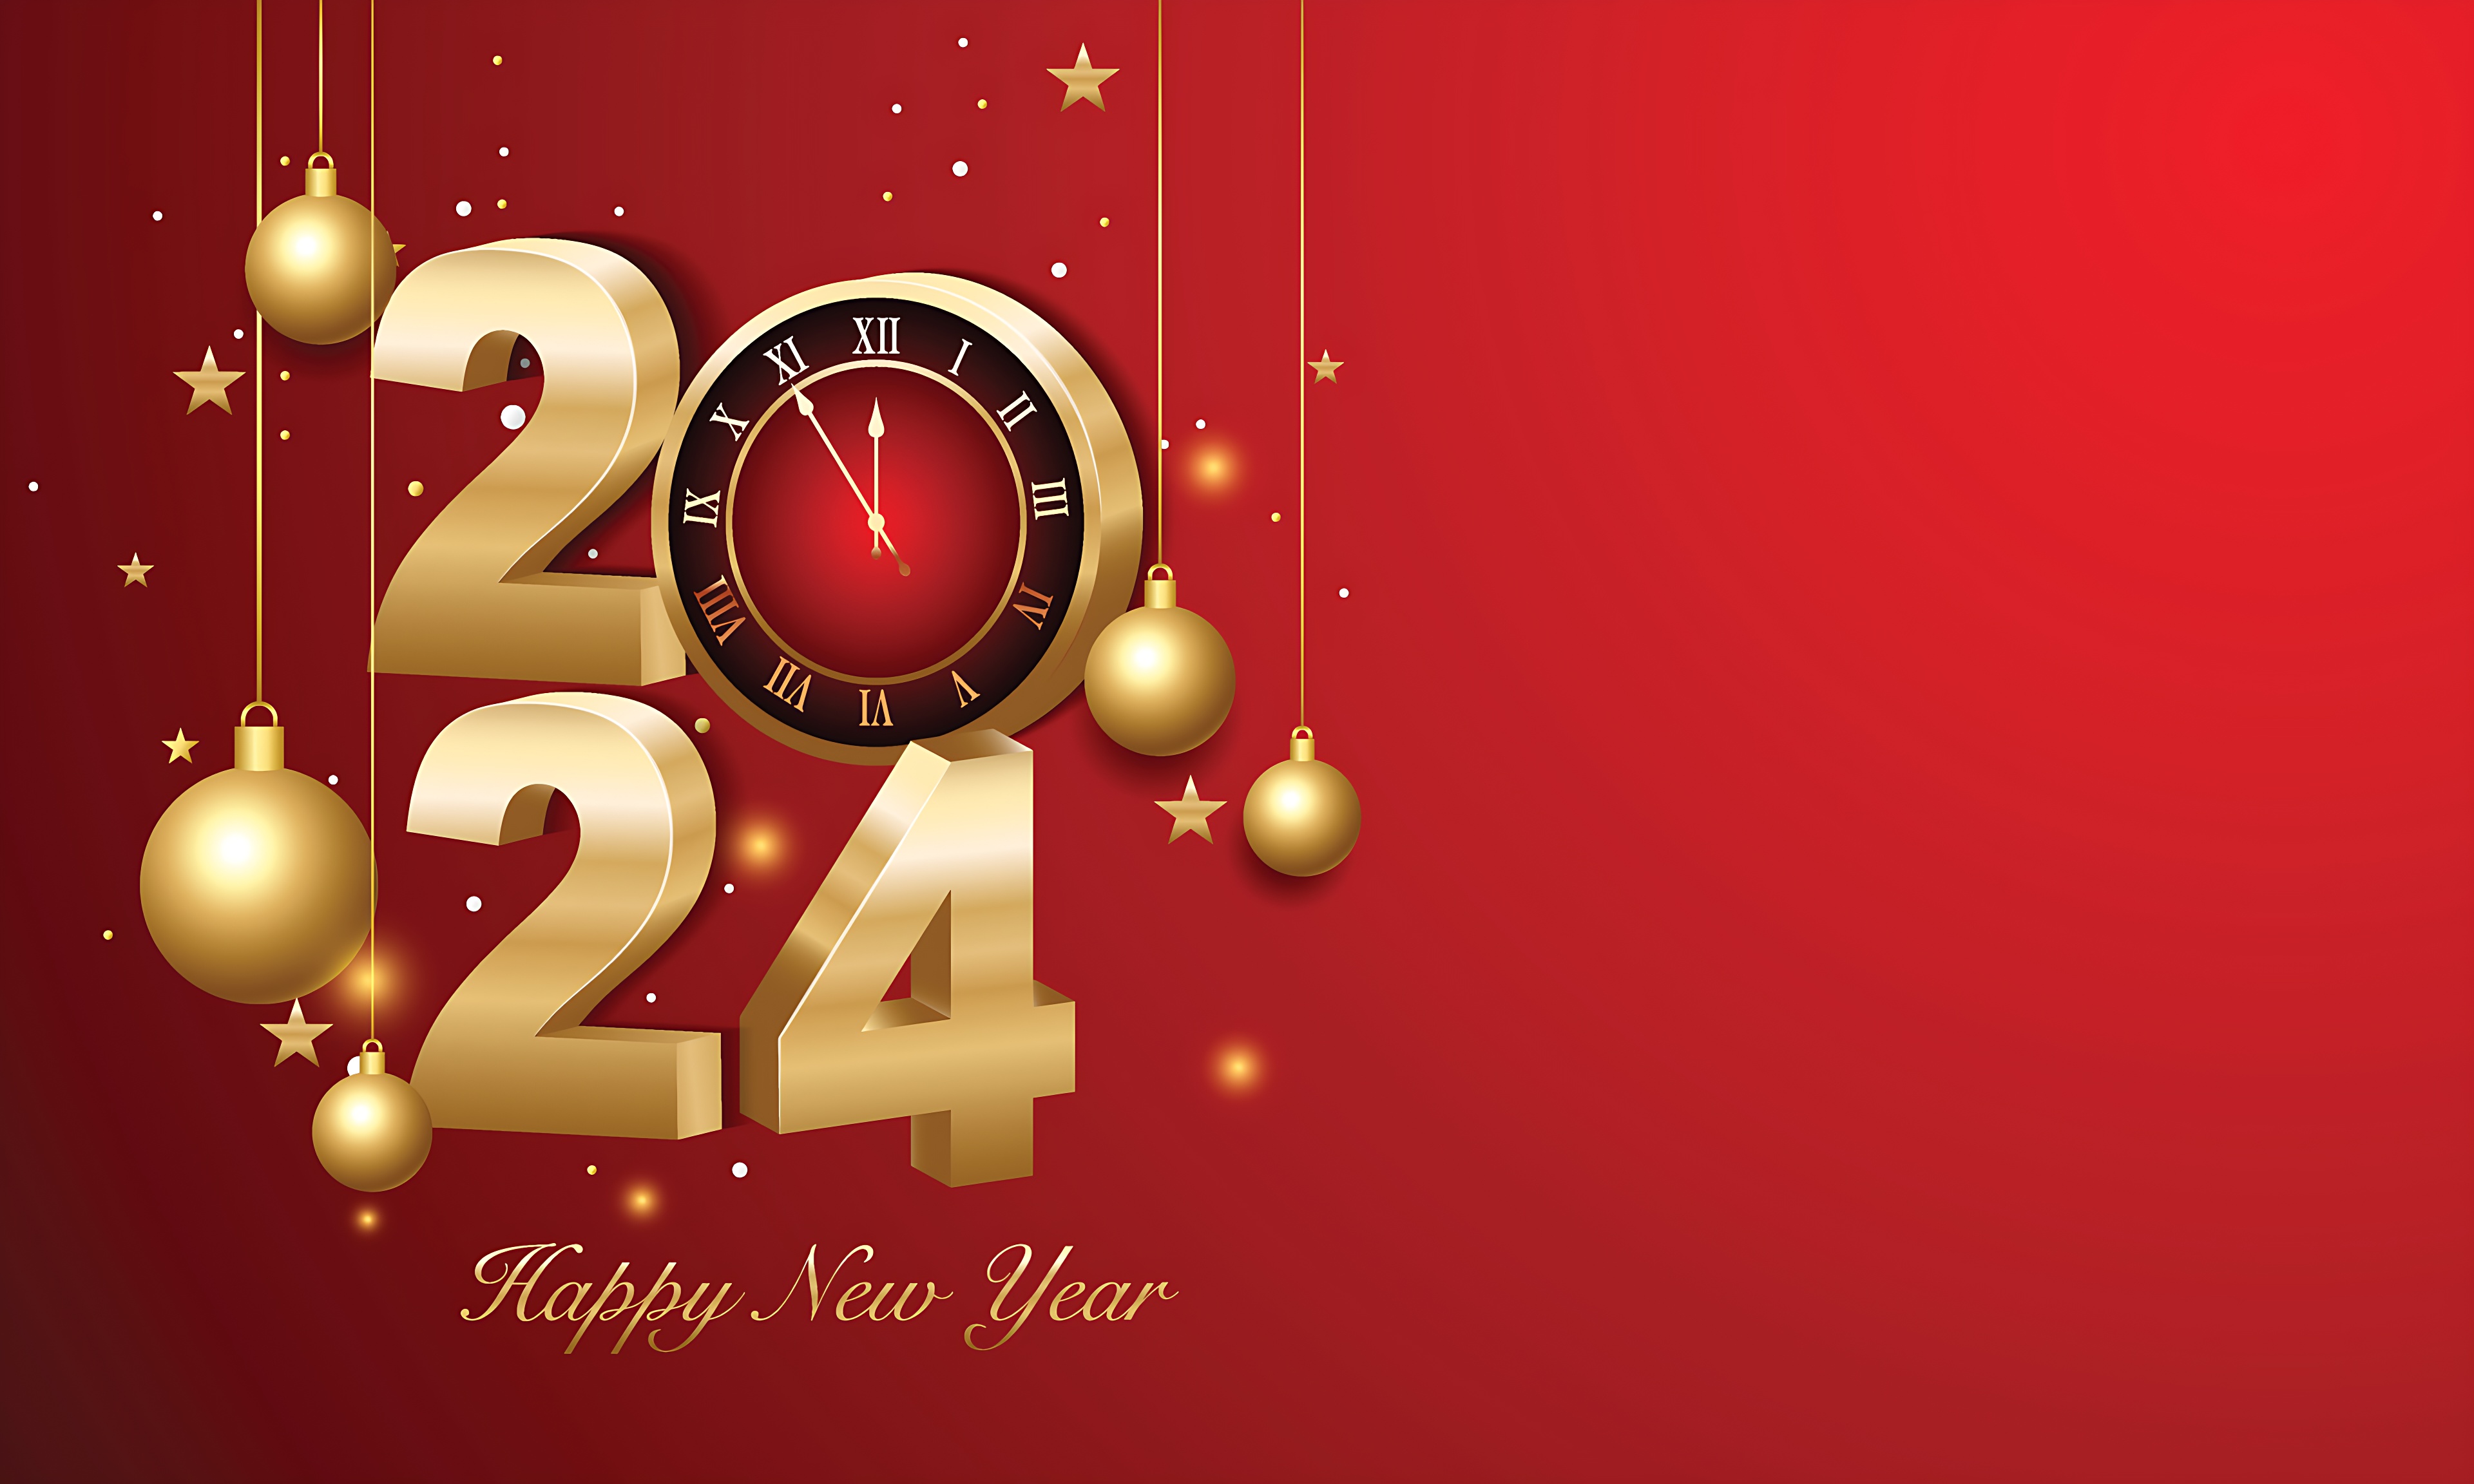 New Year 2024 4k Ultra HD Wallpaper Gold Letter And Number